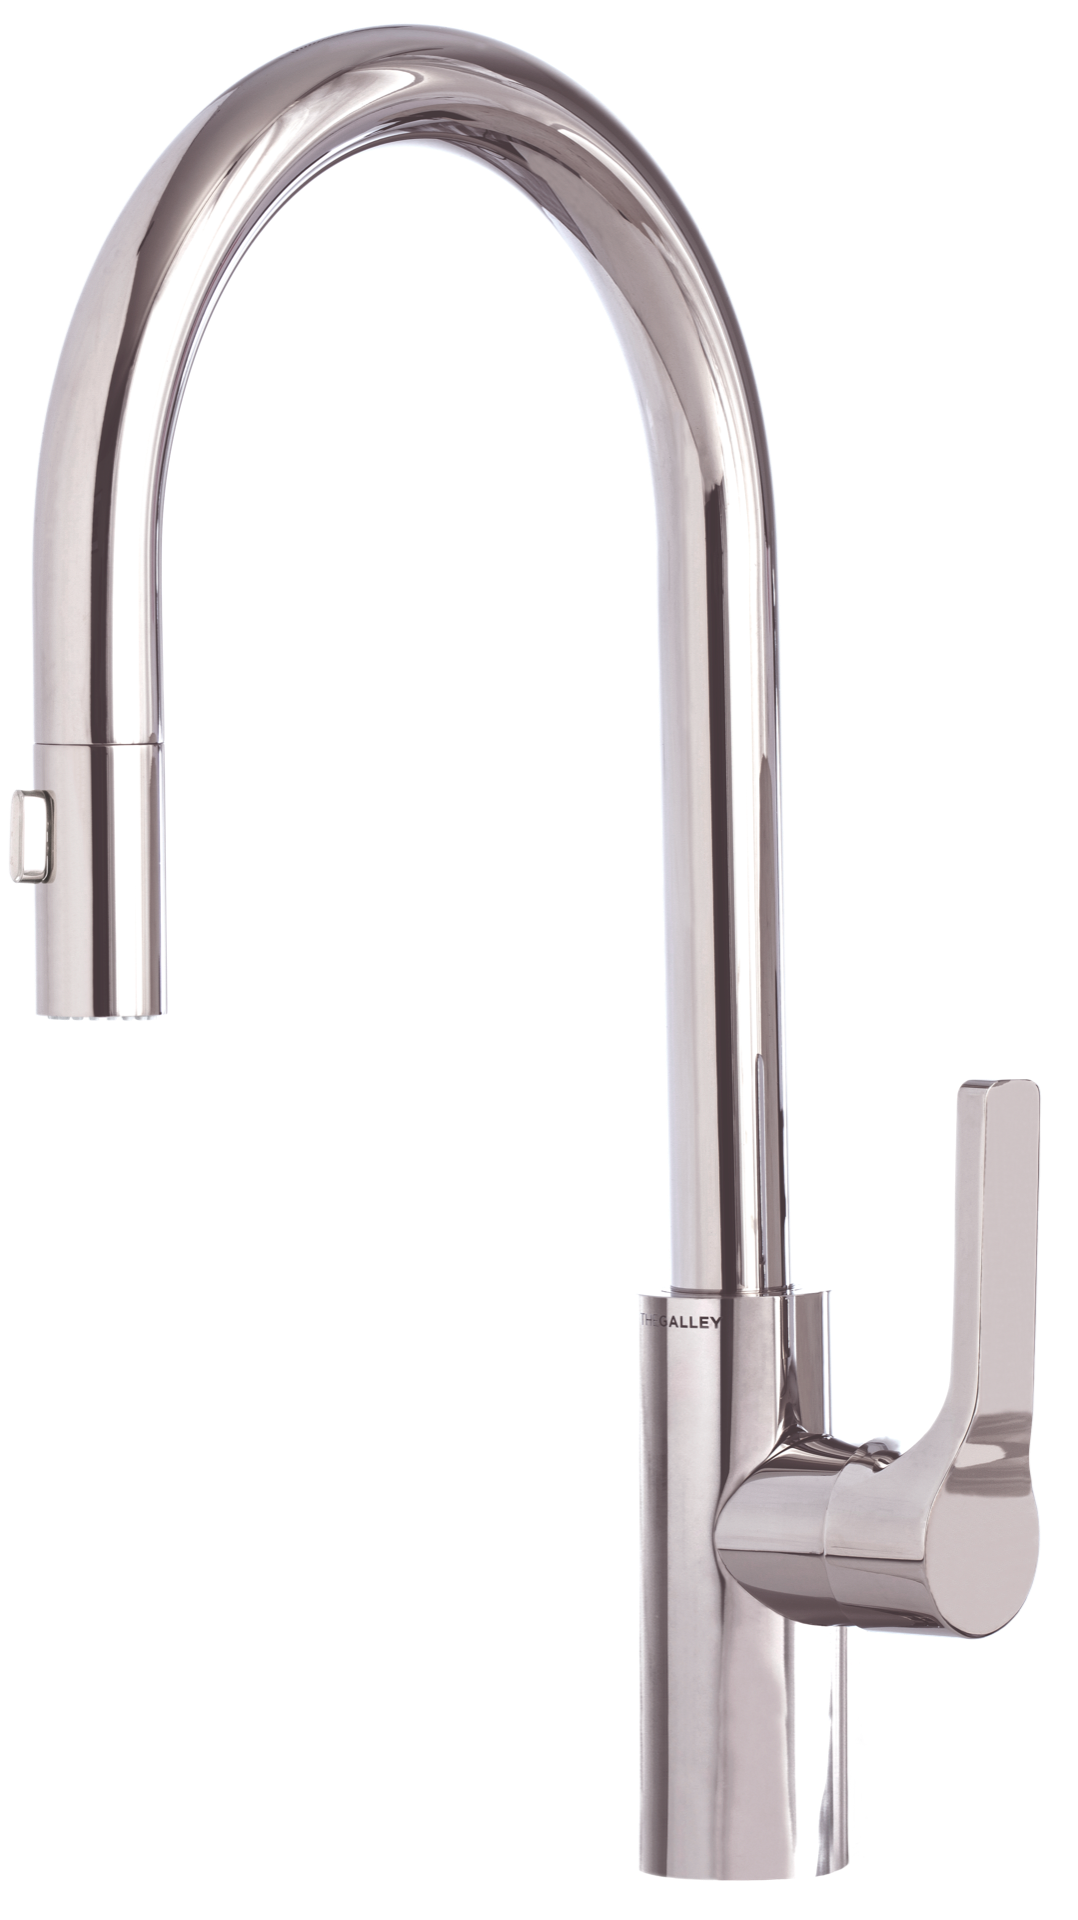 The Galley Ideal Tap High Flow with Water Filtration System